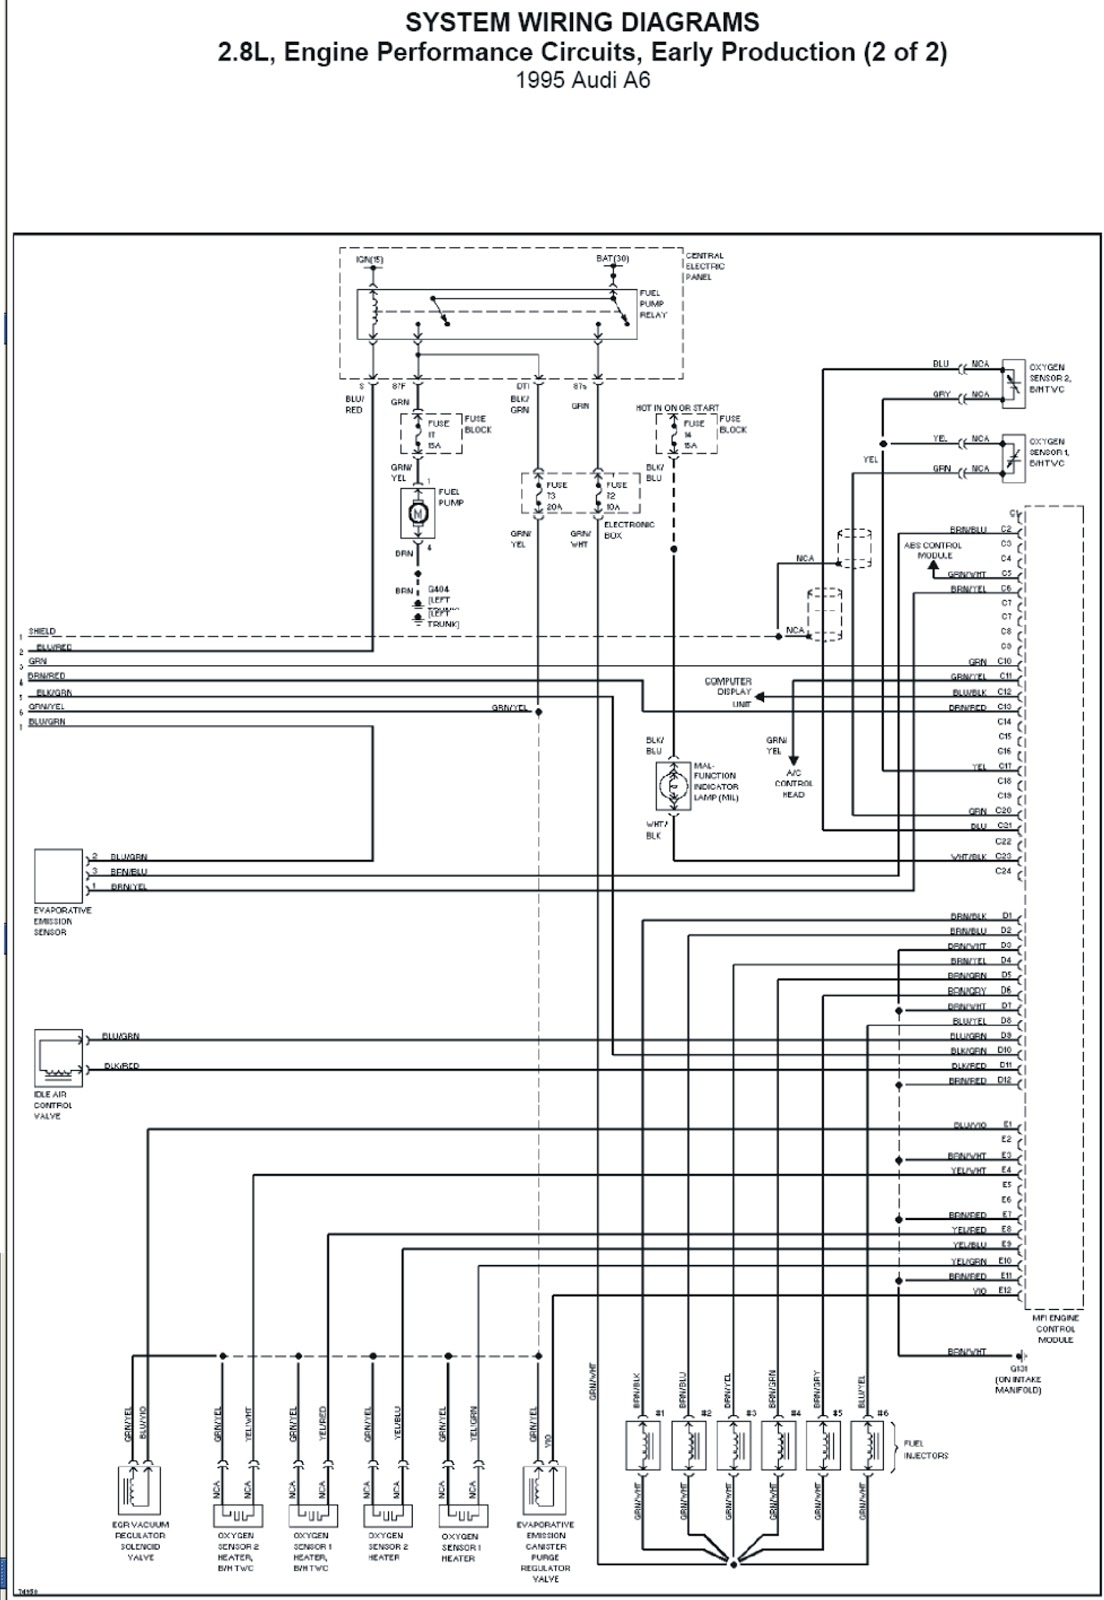 1996 Audi A6 Engine Performance Circuits Wiring Diagrams